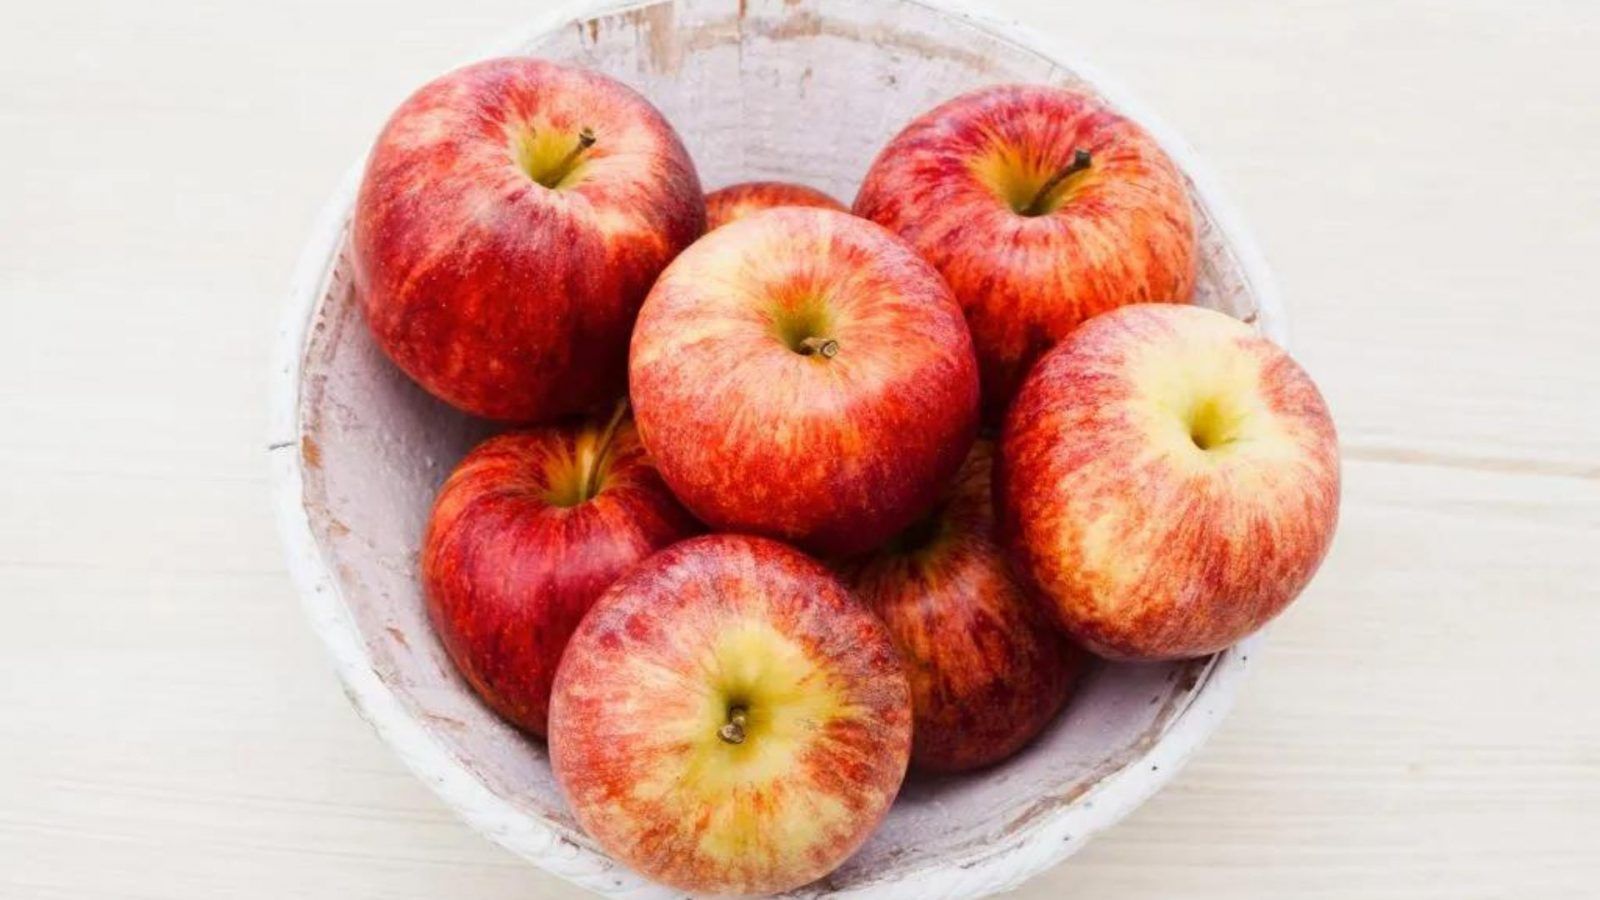 Should you refrigerate apples to keep them fresh?